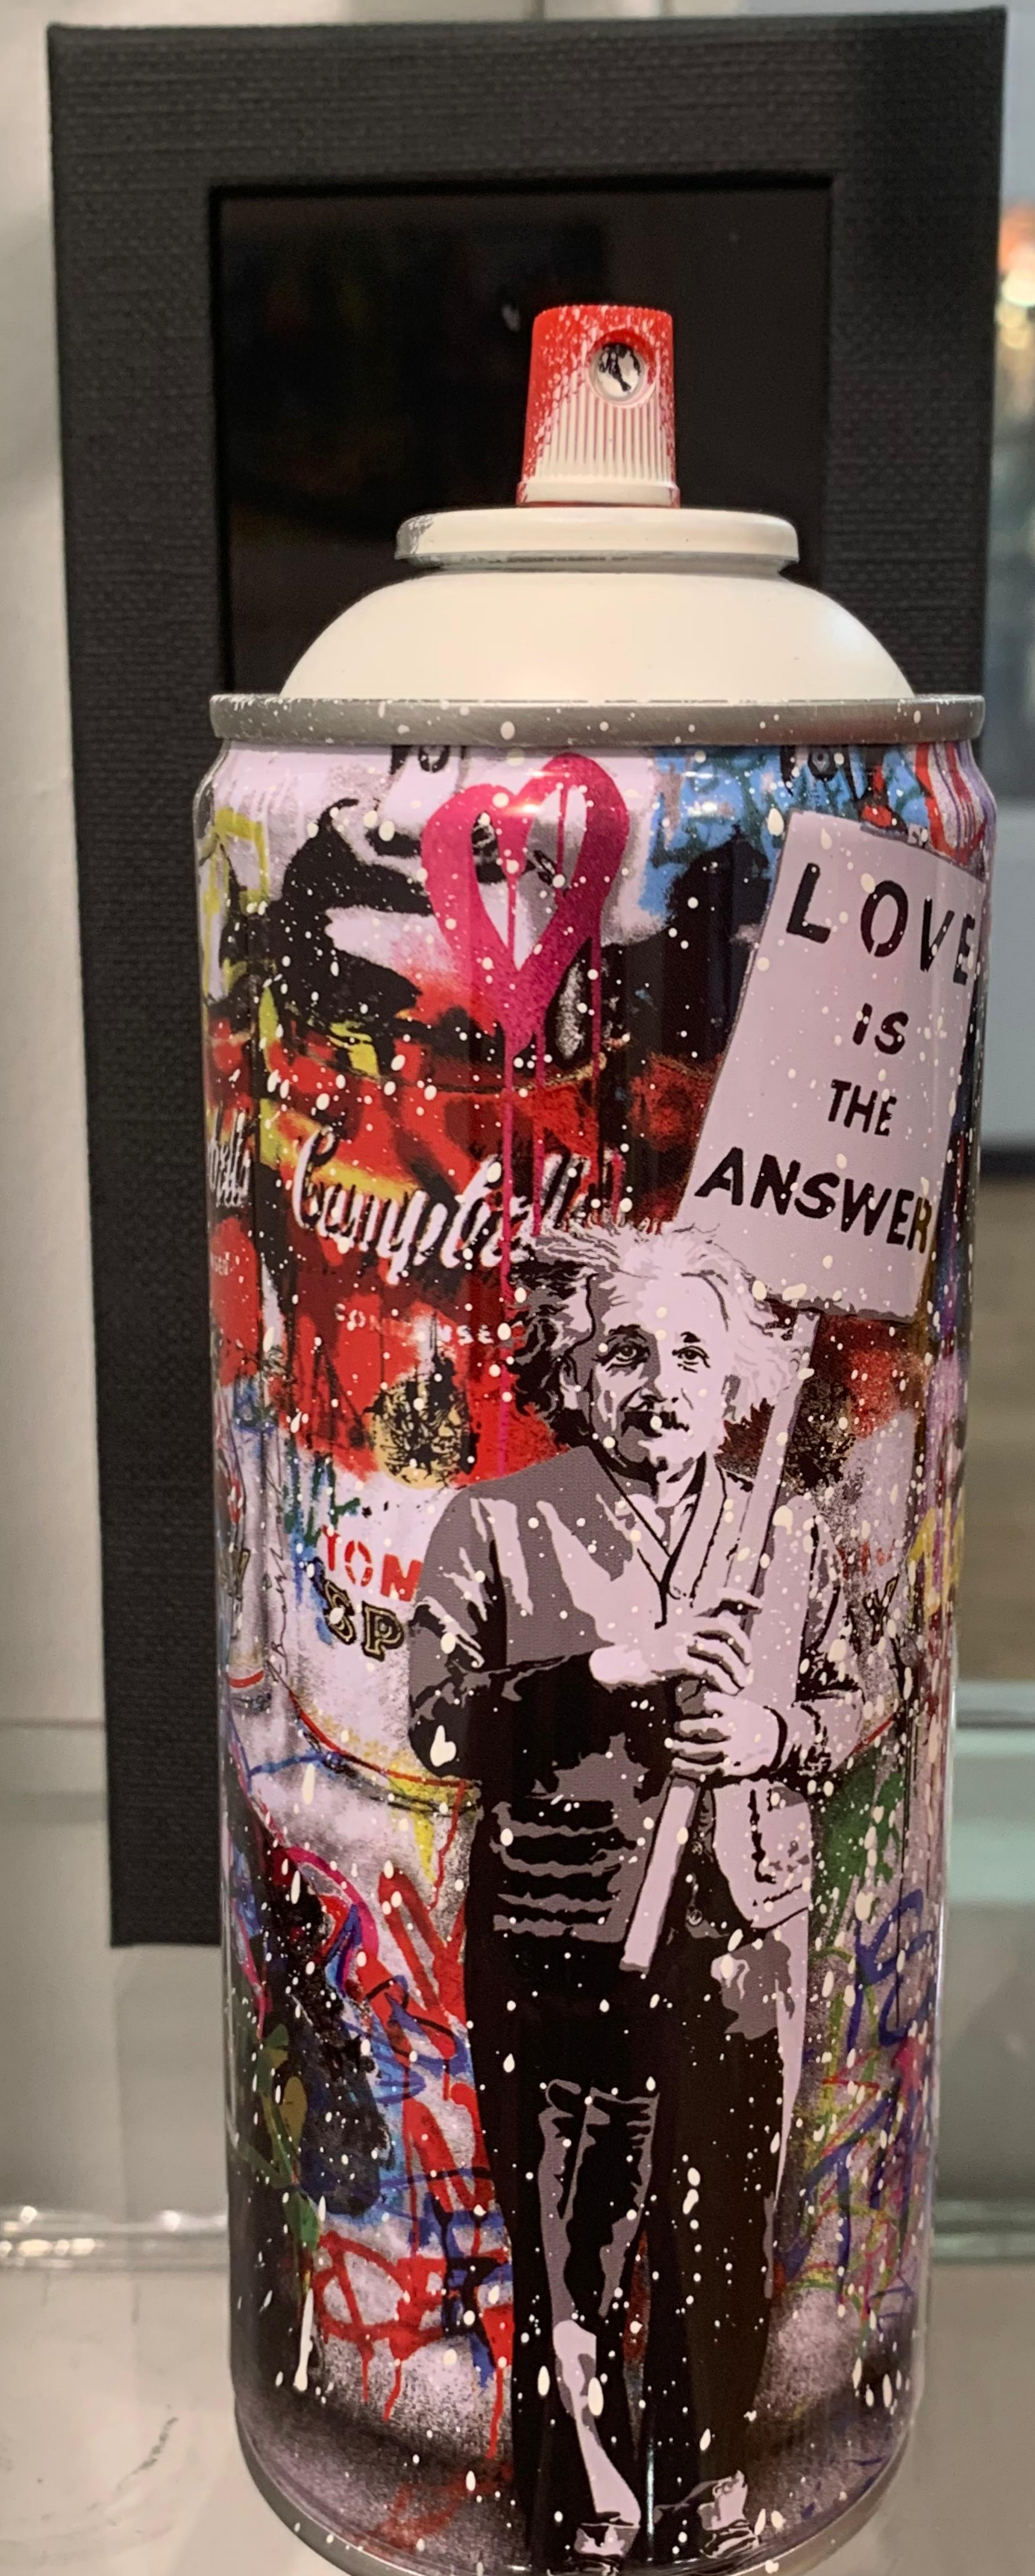 Love is the Answer (Red), in box hand numbered with thumbprint - Art by Mr. Brainwash